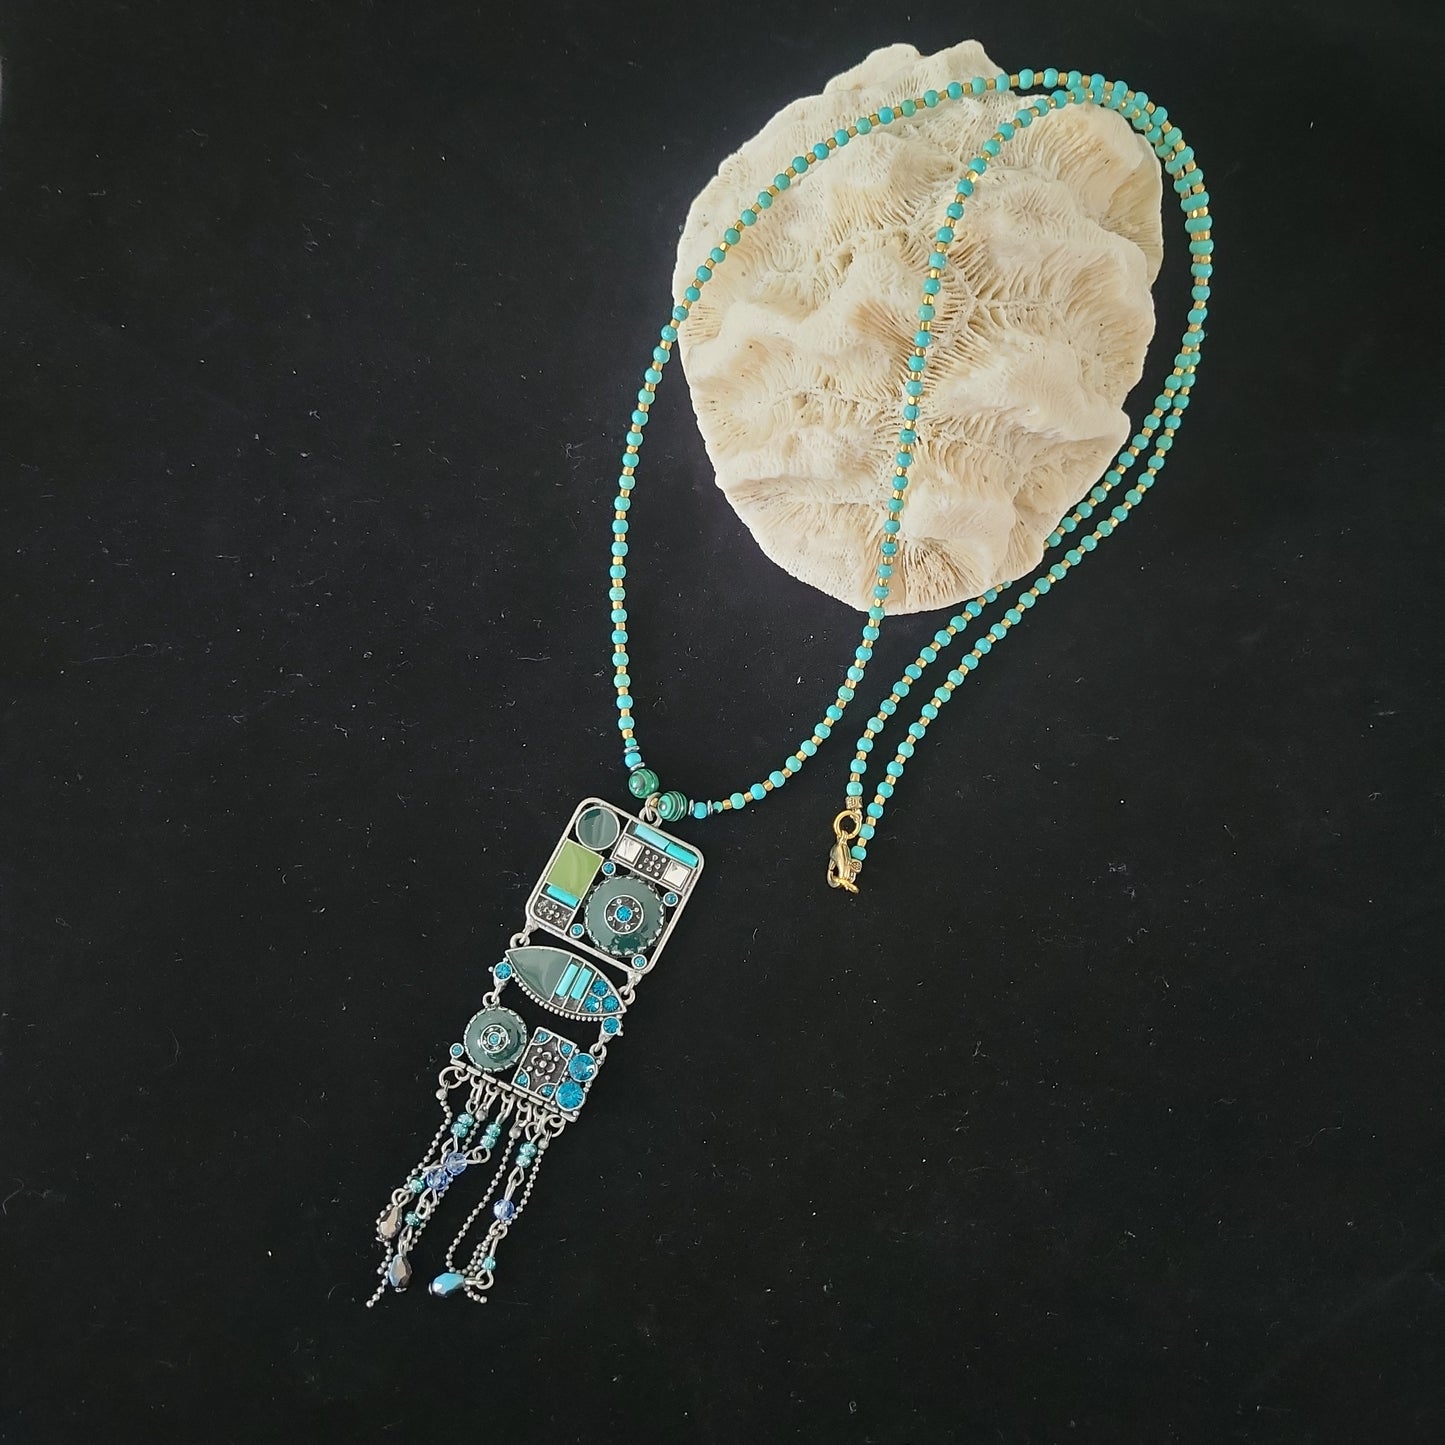 Boho Necklace with Eclectic Pendant